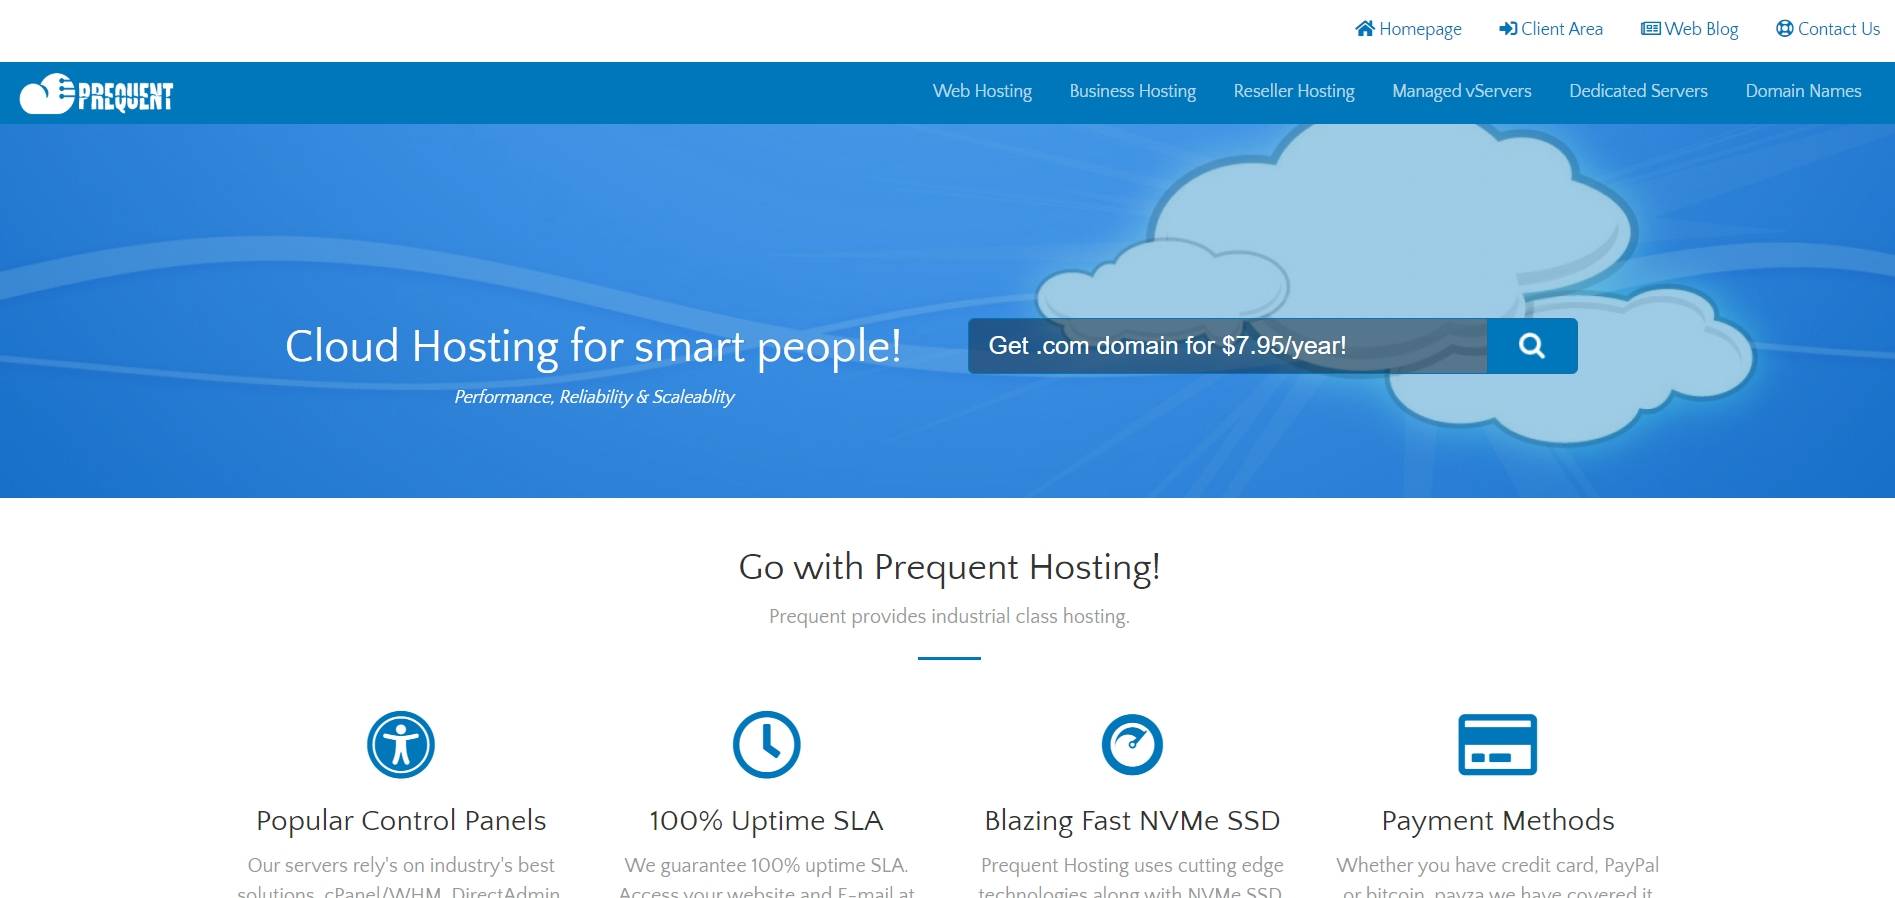 Prequent Hosting